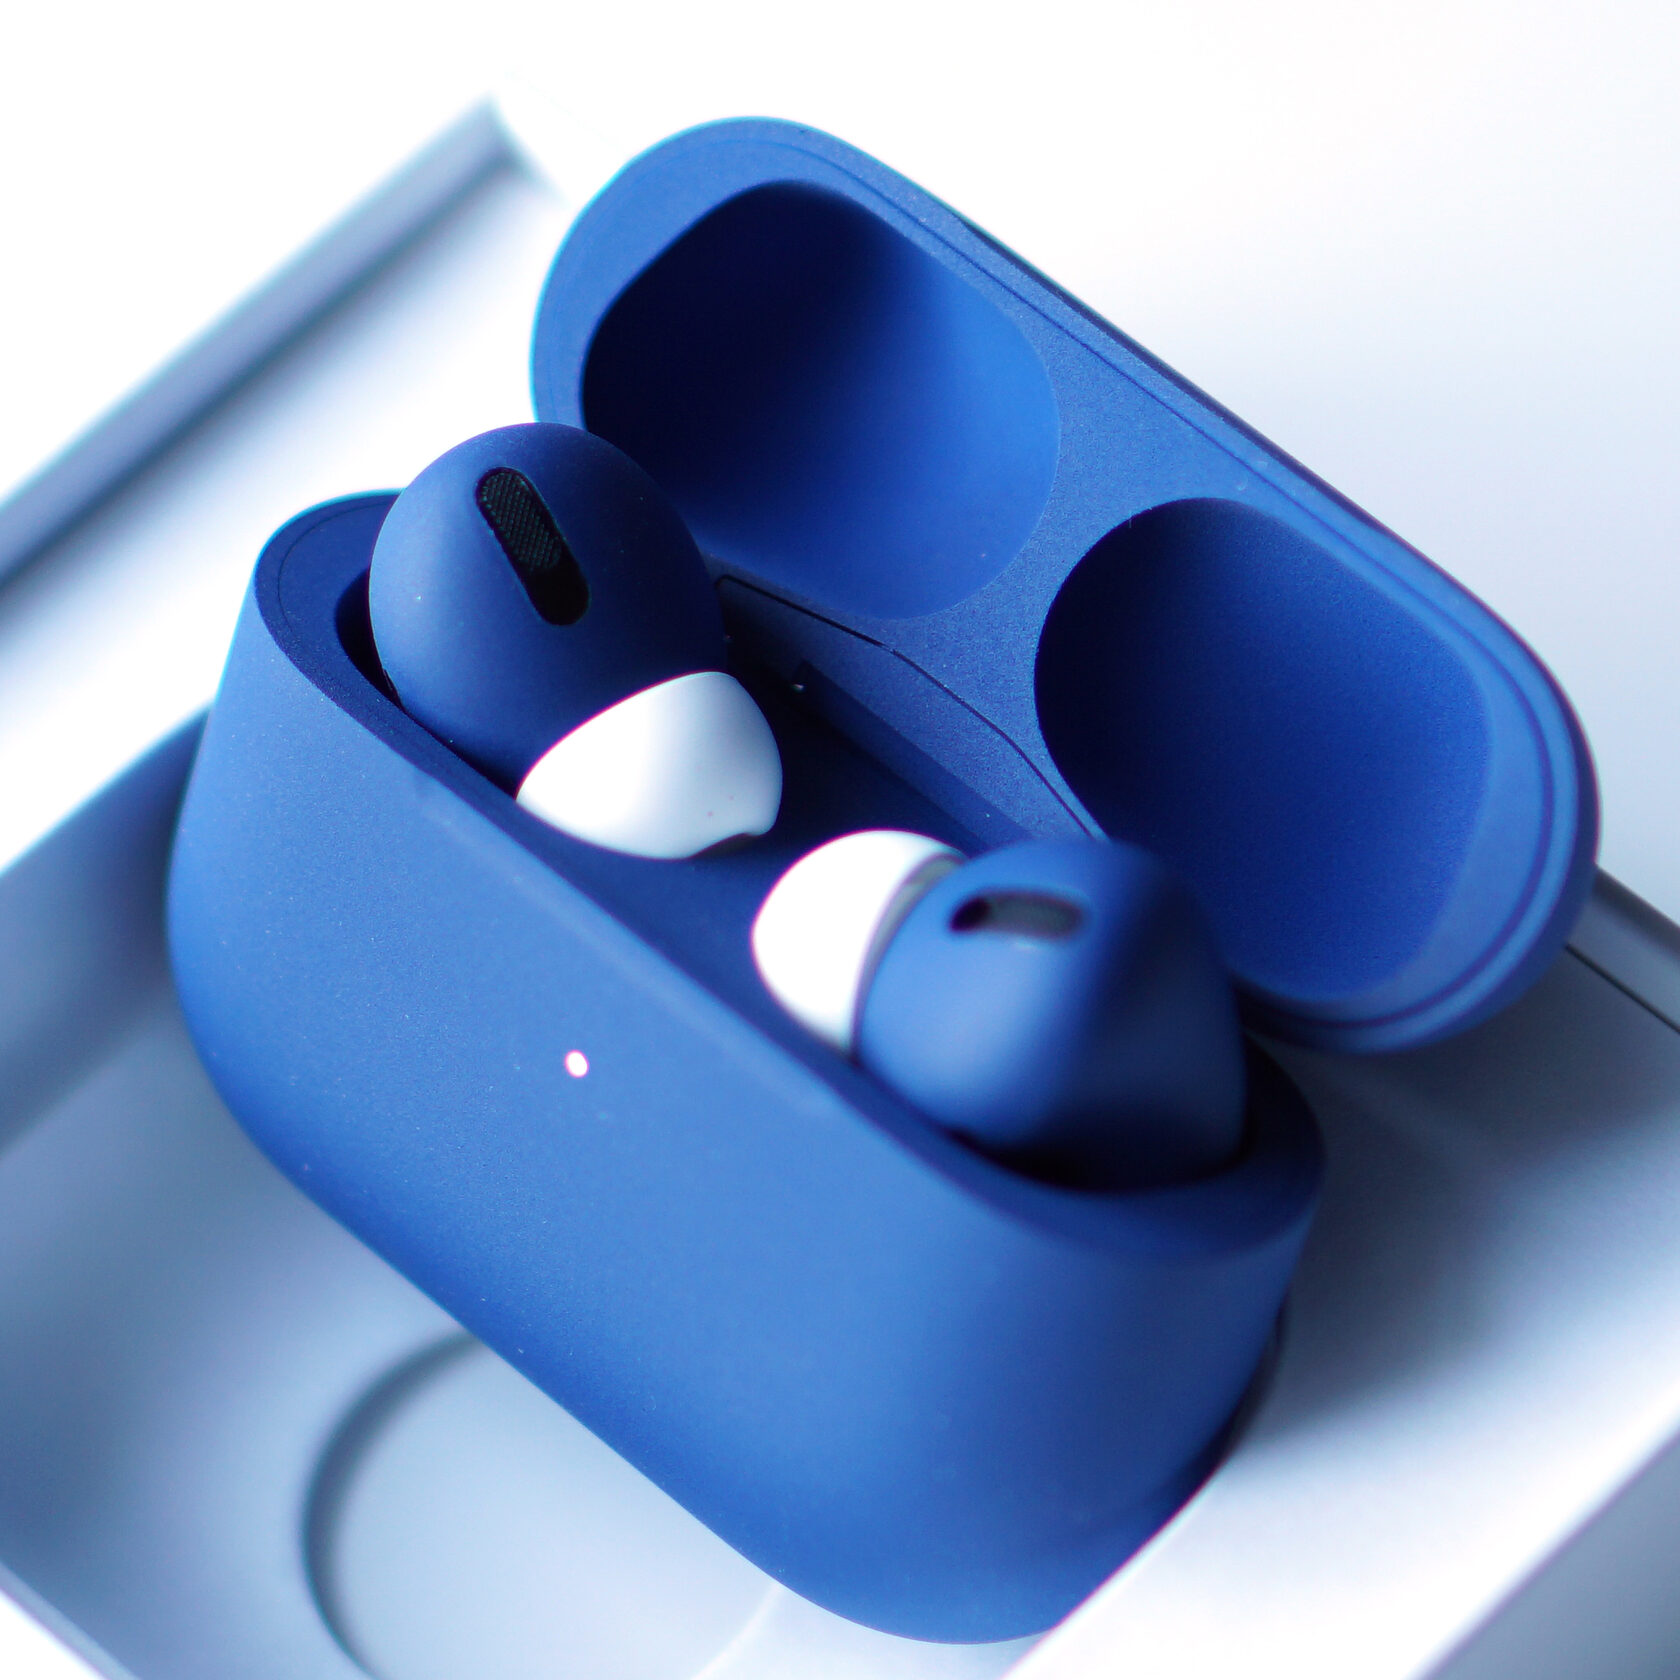 Sony airpods. AIRPODS Pro 2. Аирподсы 3. AIRPODS Pro 3. AIRPODS Pro 2 Blue.